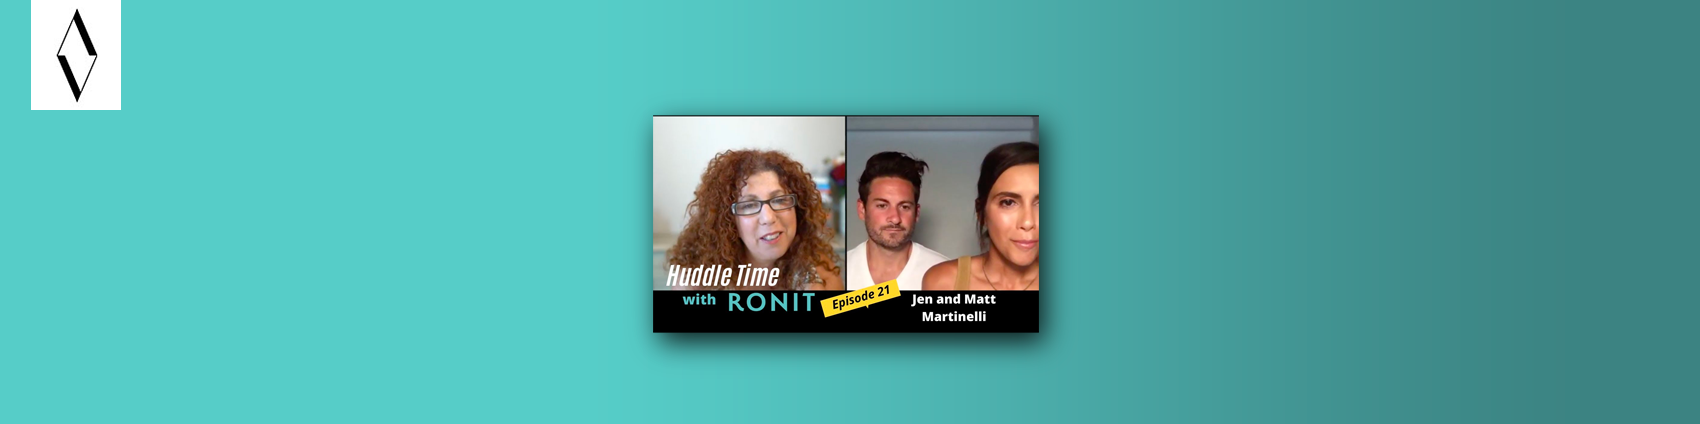 Canvas ME + Huddle Time With Ronit LIVE